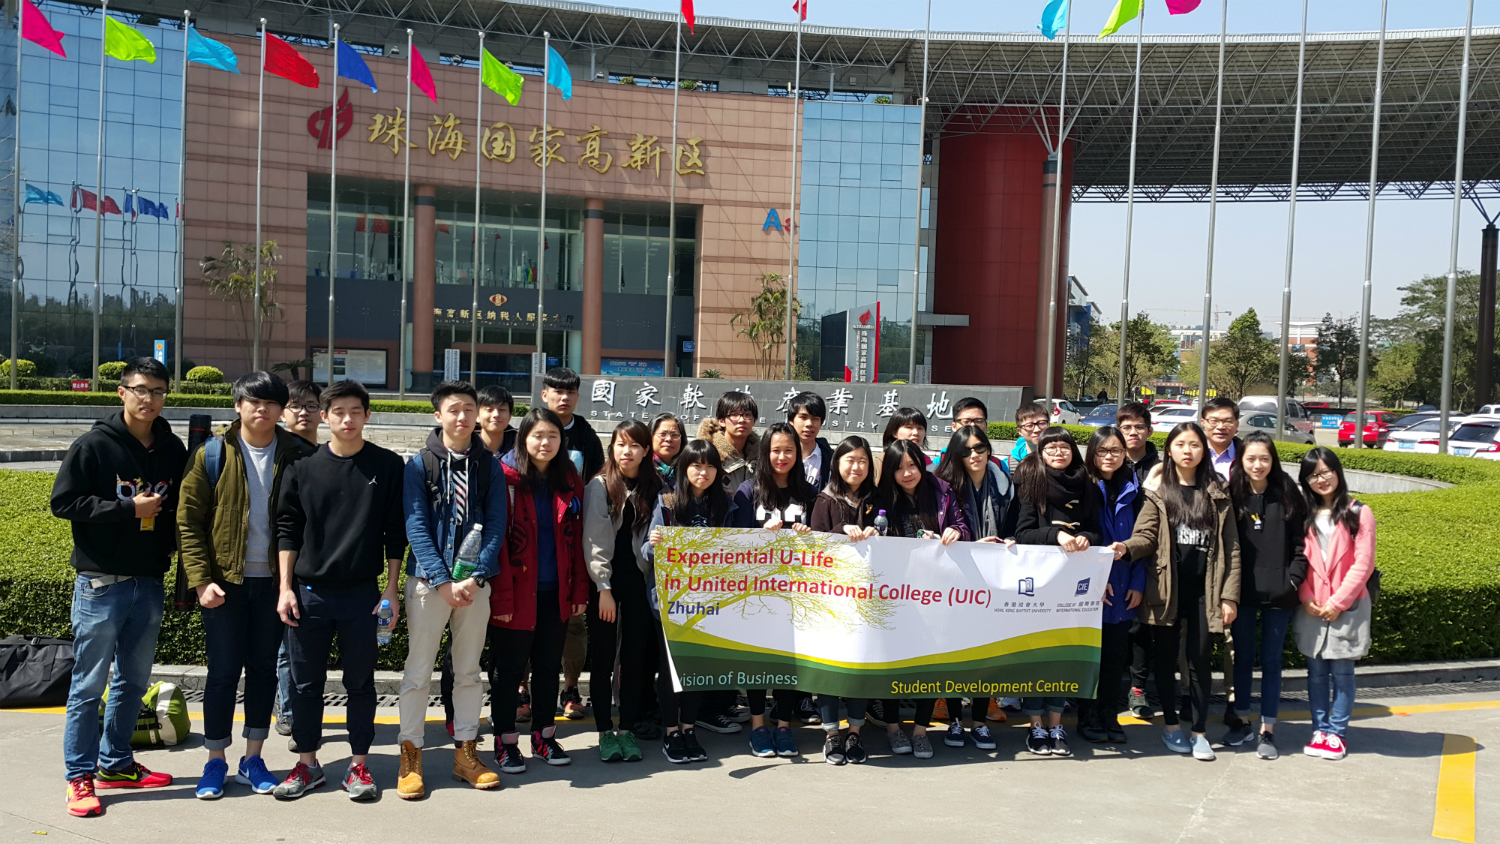 CIE students visited the state-sponsored ‘Science Park’ in Zhuhai, housing around 6,000 young entrepreneurs and employees.